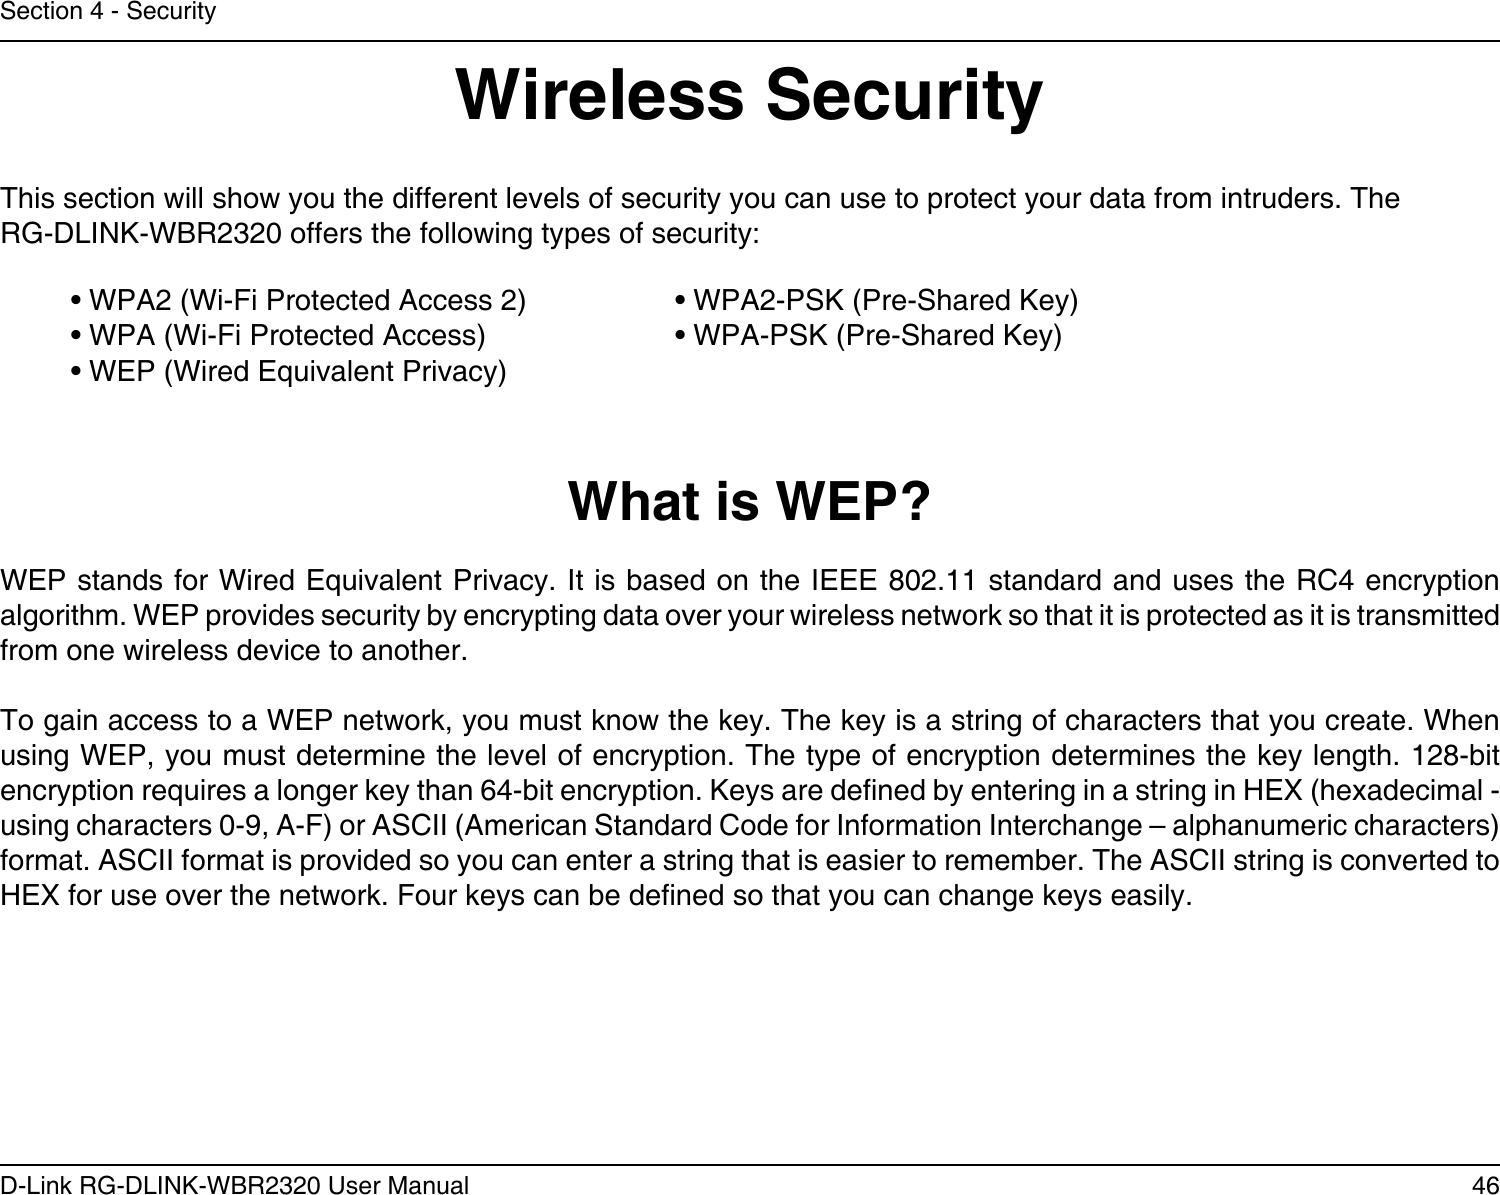 46D-Link RG-DLINK-WBR2320 User ManualSection 4 - SecurityWireless SecurityThis section will show you the different levels of security you can use to protect your data from intruders. The RG-DLINK-WBR2320 offers the following types of security:• WPA2 (Wi-Fi Protected Access 2)     • WPA2-PSK (Pre-Shared Key)• WPA (Wi-Fi Protected Access)      • WPA-PSK (Pre-Shared Key)• WEP (Wired Equivalent Privacy)What is WEP?WEP stands for Wired Equivalent Privacy. It is based on the IEEE 802.11 standard and uses the RC4 encryption algorithm. WEP provides security by encrypting data over your wireless network so that it is protected as it is transmitted from one wireless device to another.To gain access to a WEP network, you must know the key. The key is a string of characters that you create. When using WEP, you must determine the level of encryption. The type of encryption determines the key length. 128-bit encryption requires a longer key than 64-bit encryption. Keys are dened by entering in a string in HEX (hexadecimal - using characters 0-9, A-F) or ASCII (American Standard Code for Information Interchange – alphanumeric characters) format. ASCII format is provided so you can enter a string that is easier to remember. The ASCII string is converted to HEX for use over the network. Four keys can be dened so that you can change keys easily.